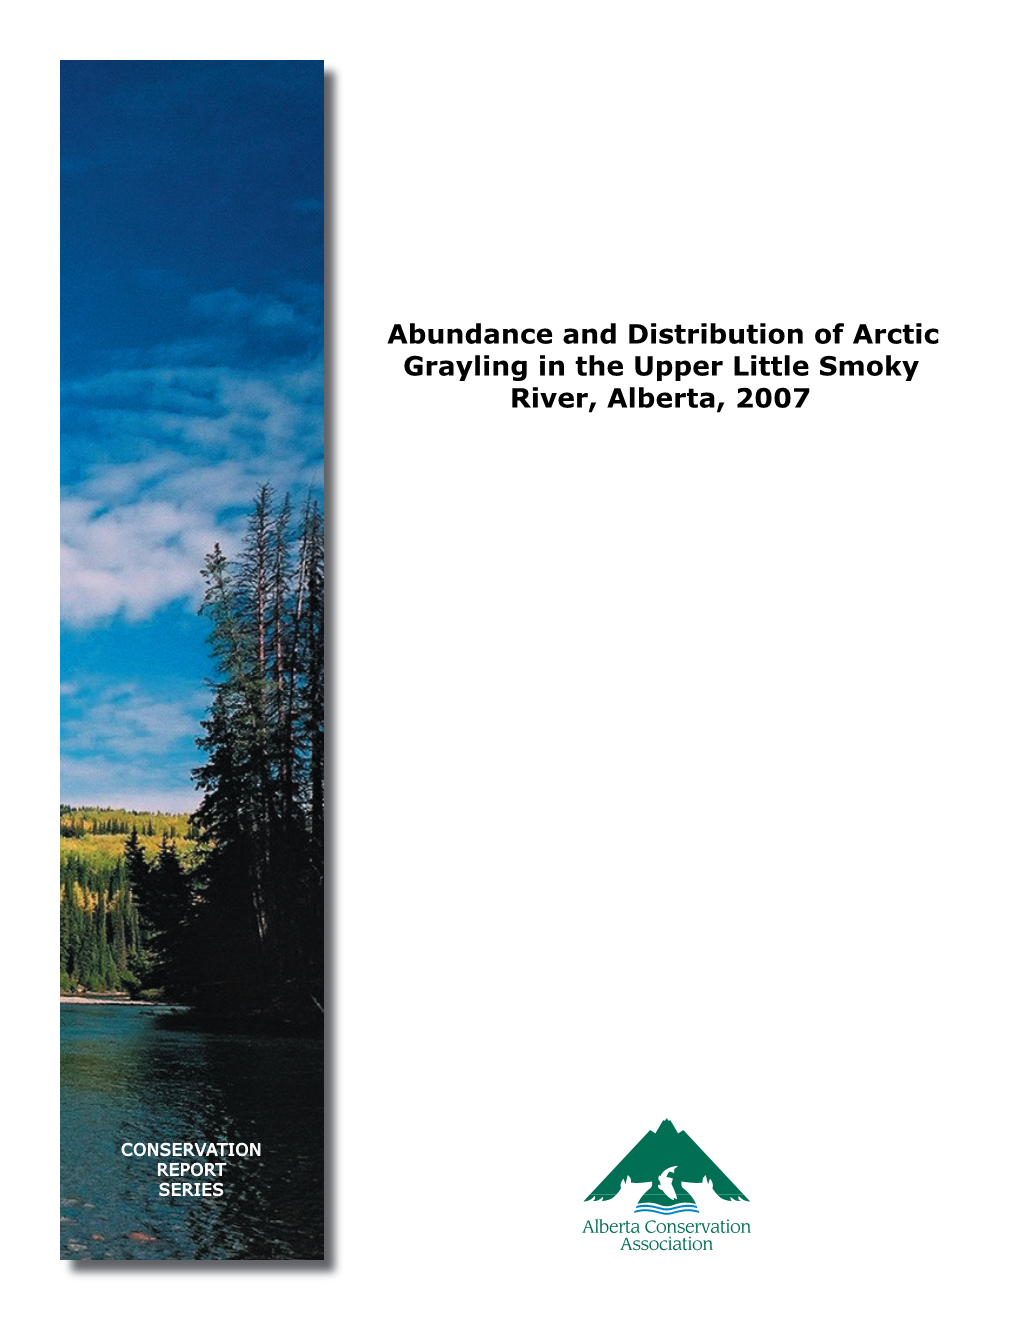 Abundance and Distribution of Arctic Grayling in the Upper Little Smoky River, Alberta, 2007